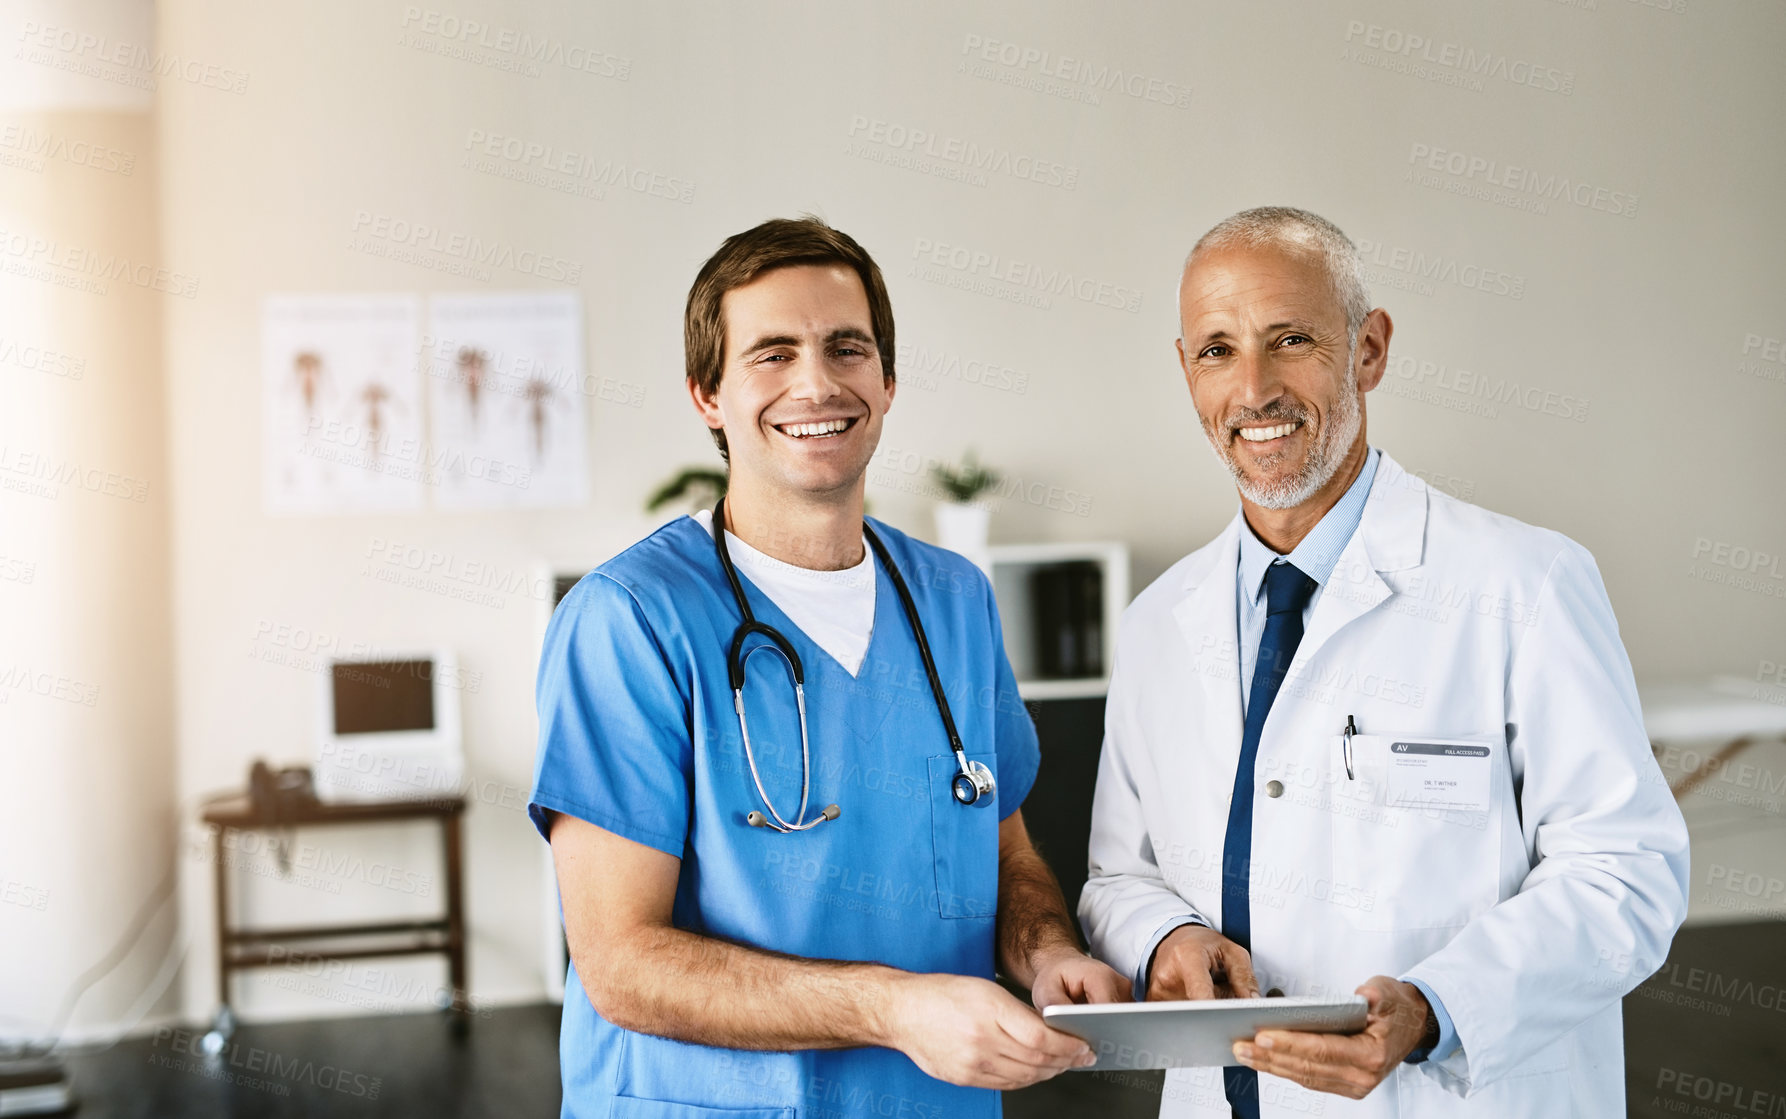 Buy stock photo Portrait of two medical practitioners using a digital tablet in a hospital